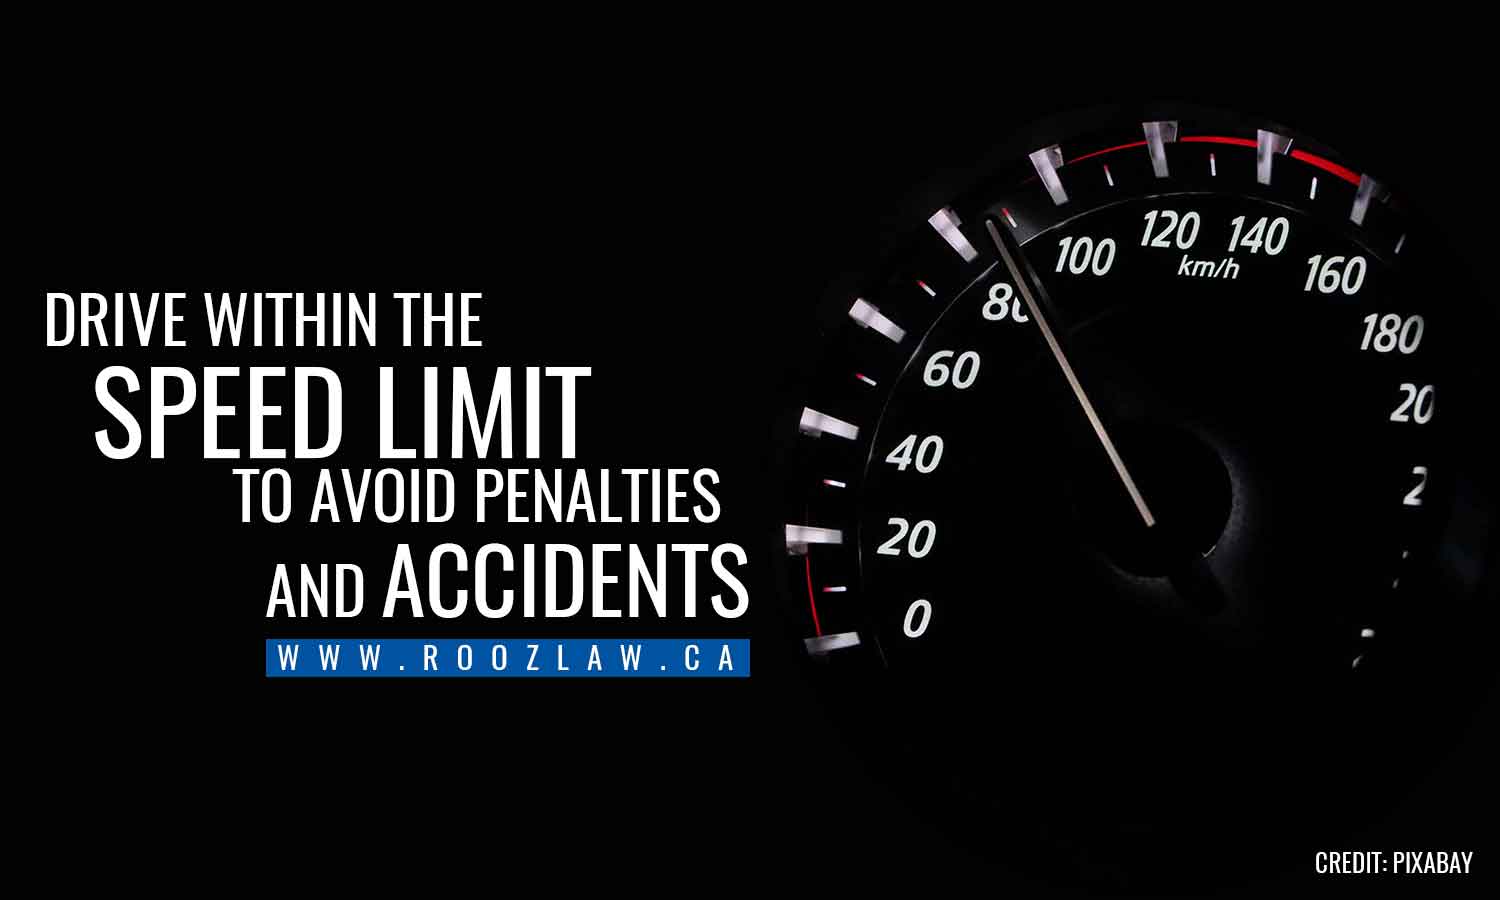 Drive-within-speed-limit-avoid-penalties-accidents